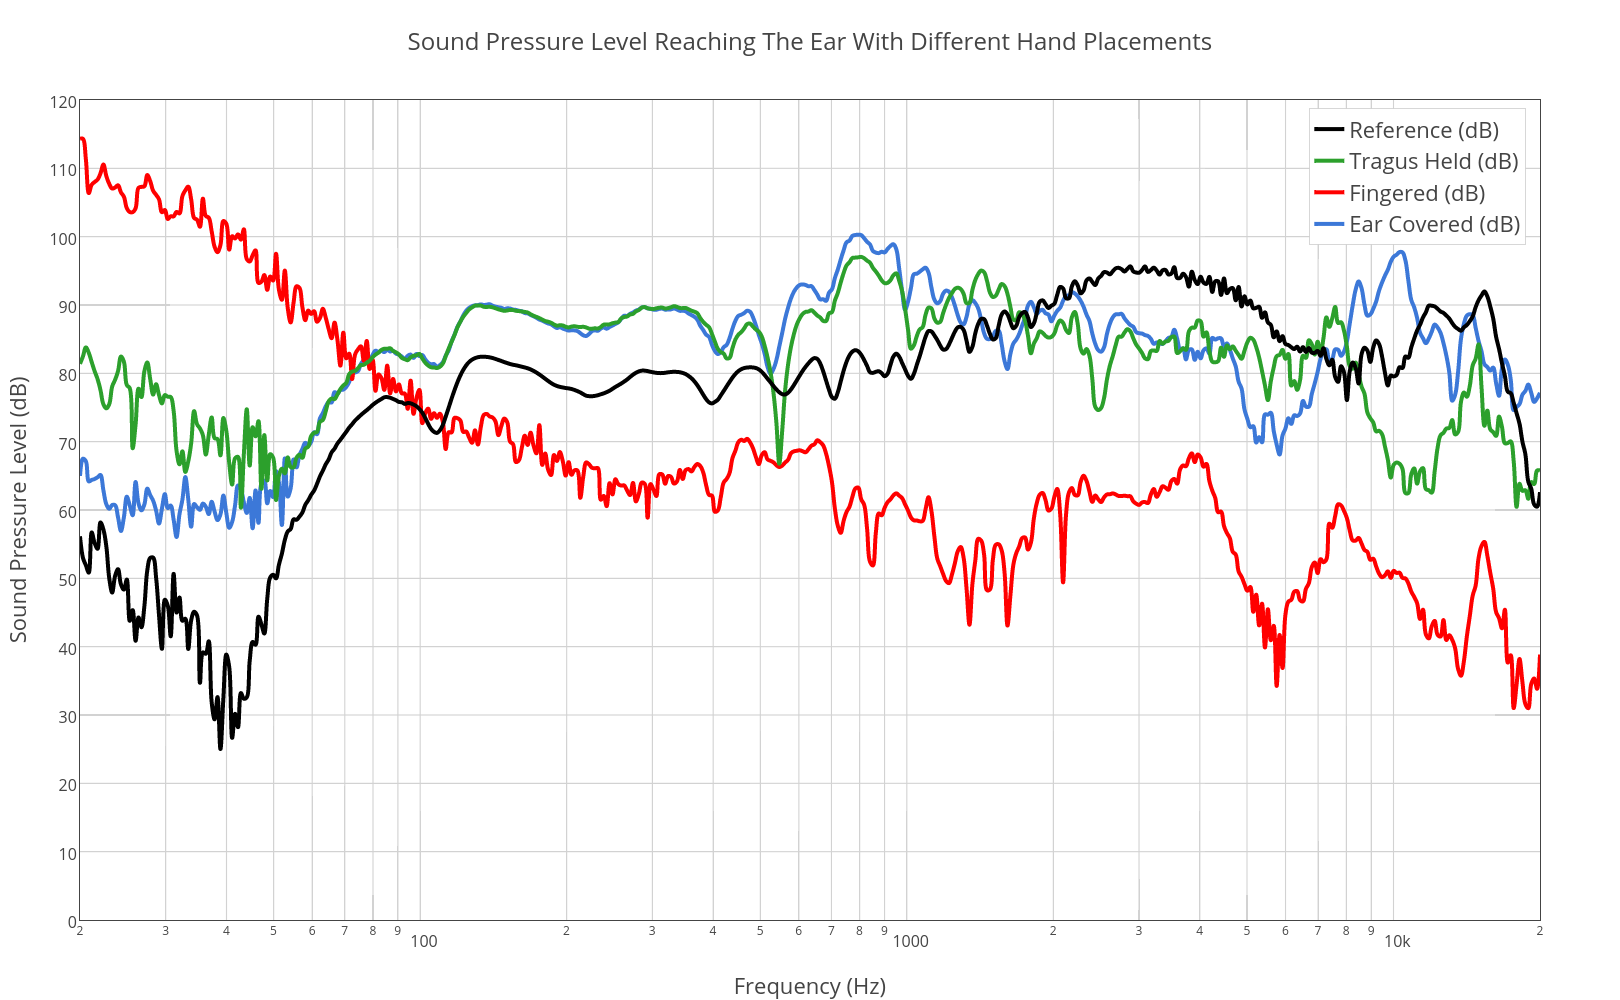 Sound Pressure Level Reaching The Ear With Different Hand Placements | scatter chart made by Mrlyule | plotly